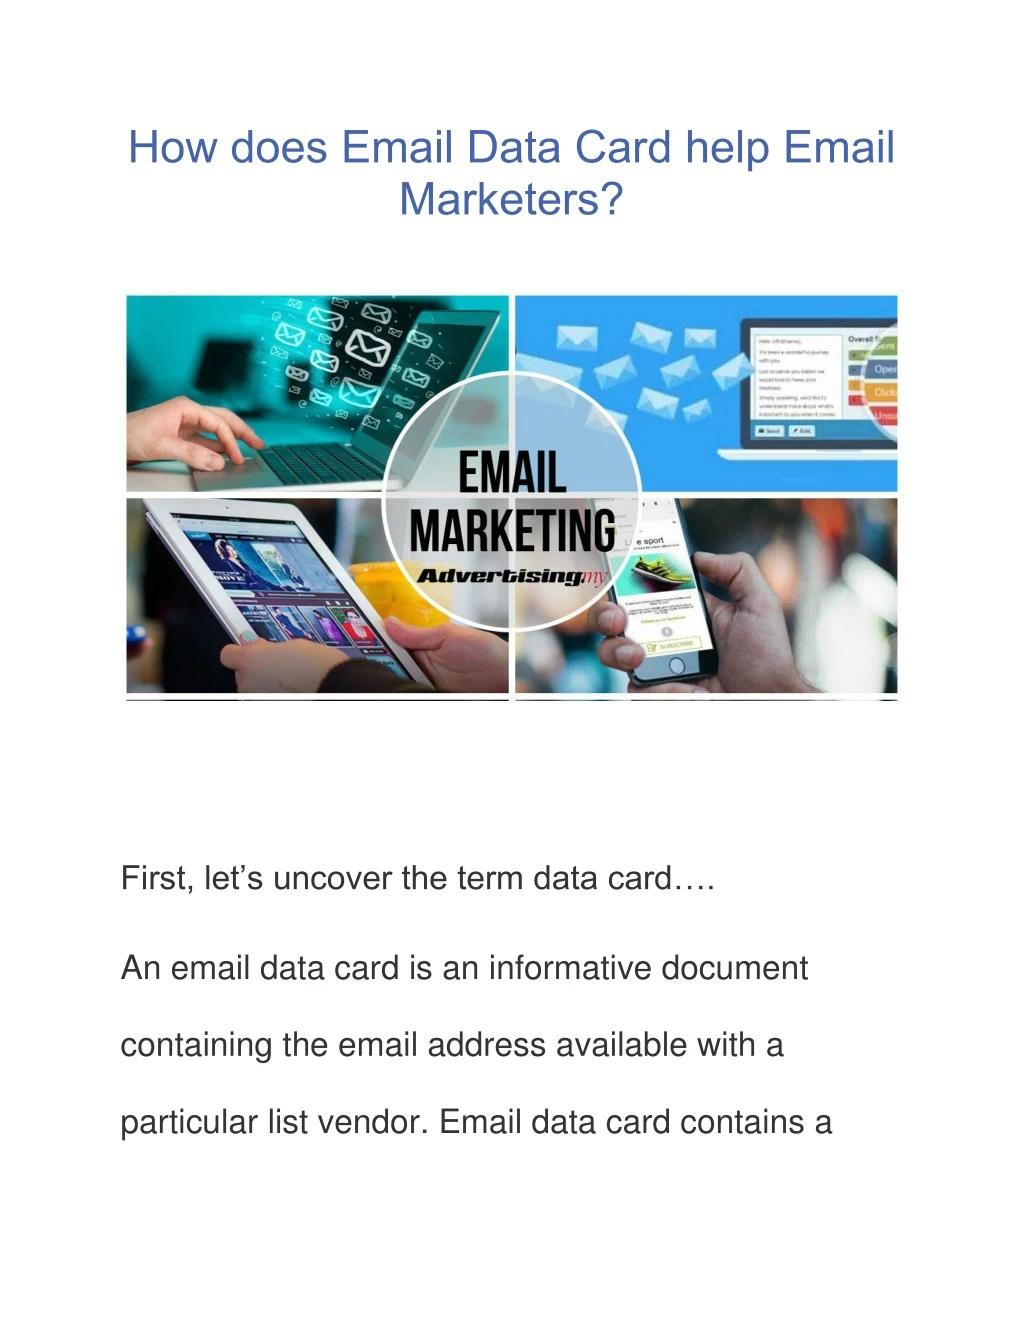 how does email data card help email marketers